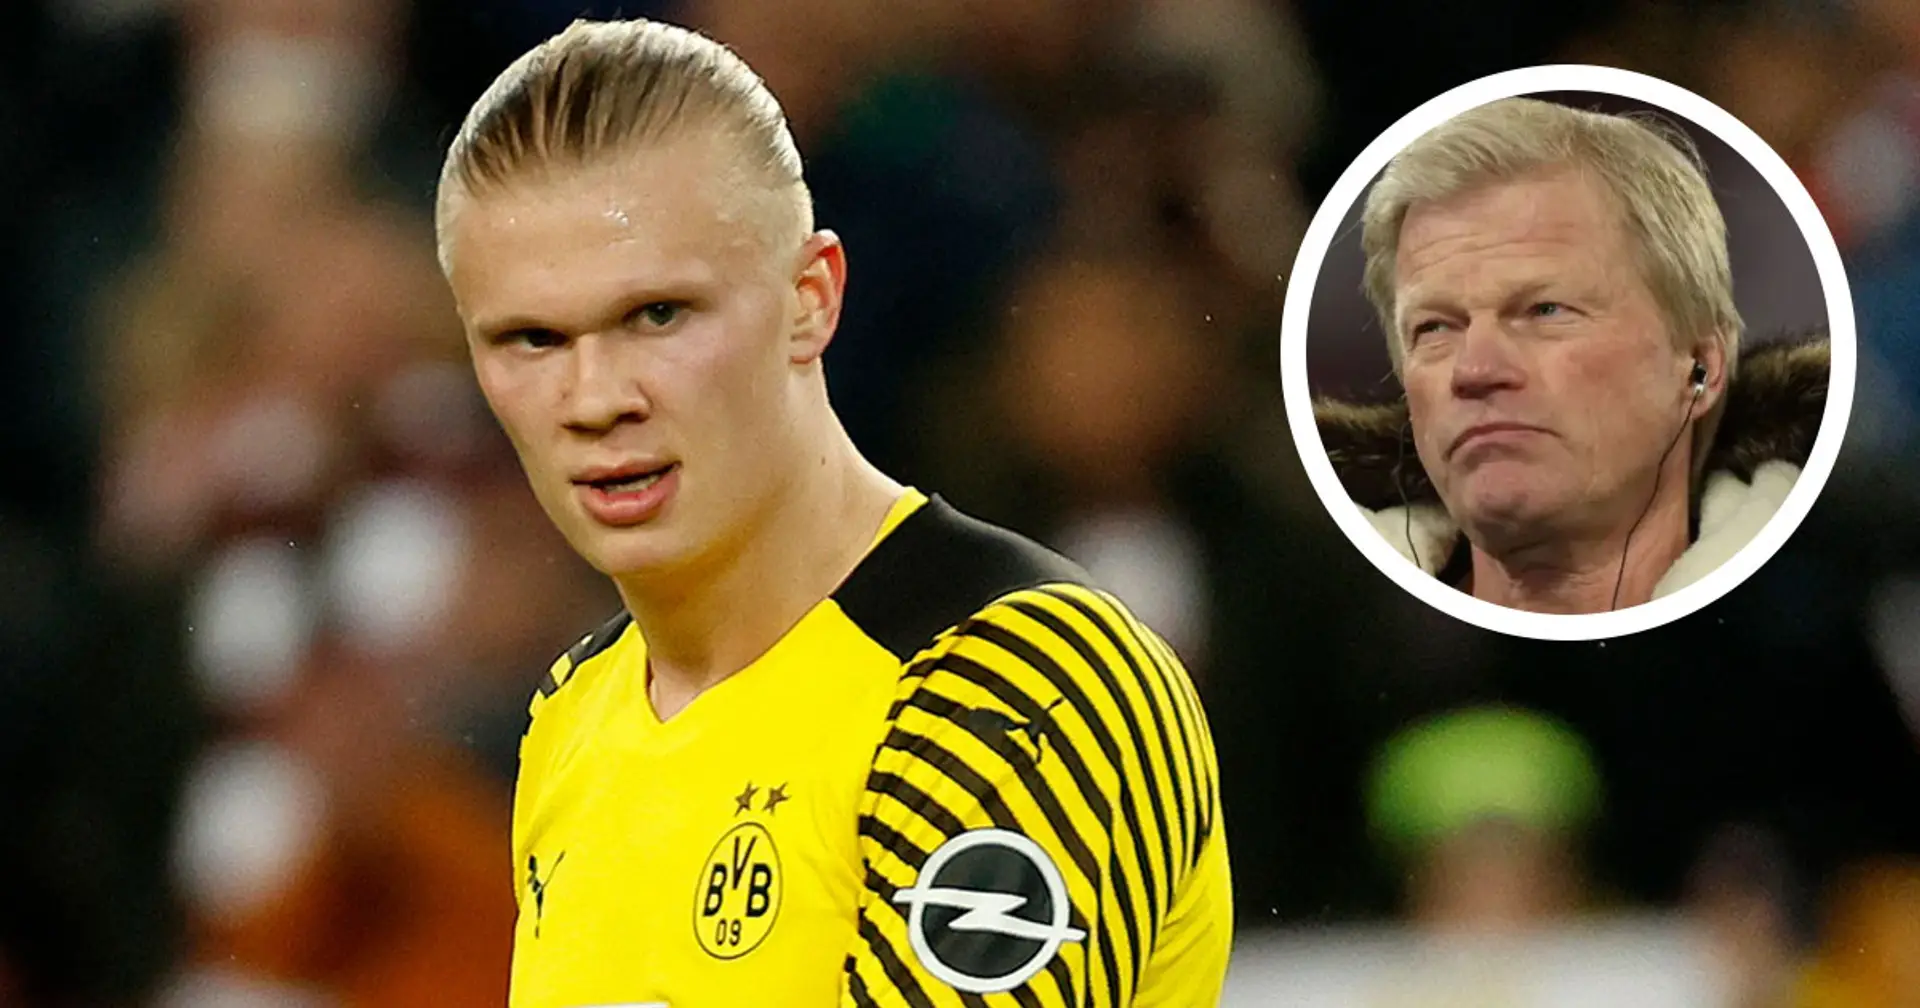 'We wouldn't be doing our job properly if we didn't look at him': Oliver Kahn rates Bayern Munich's chances of signing Haaland